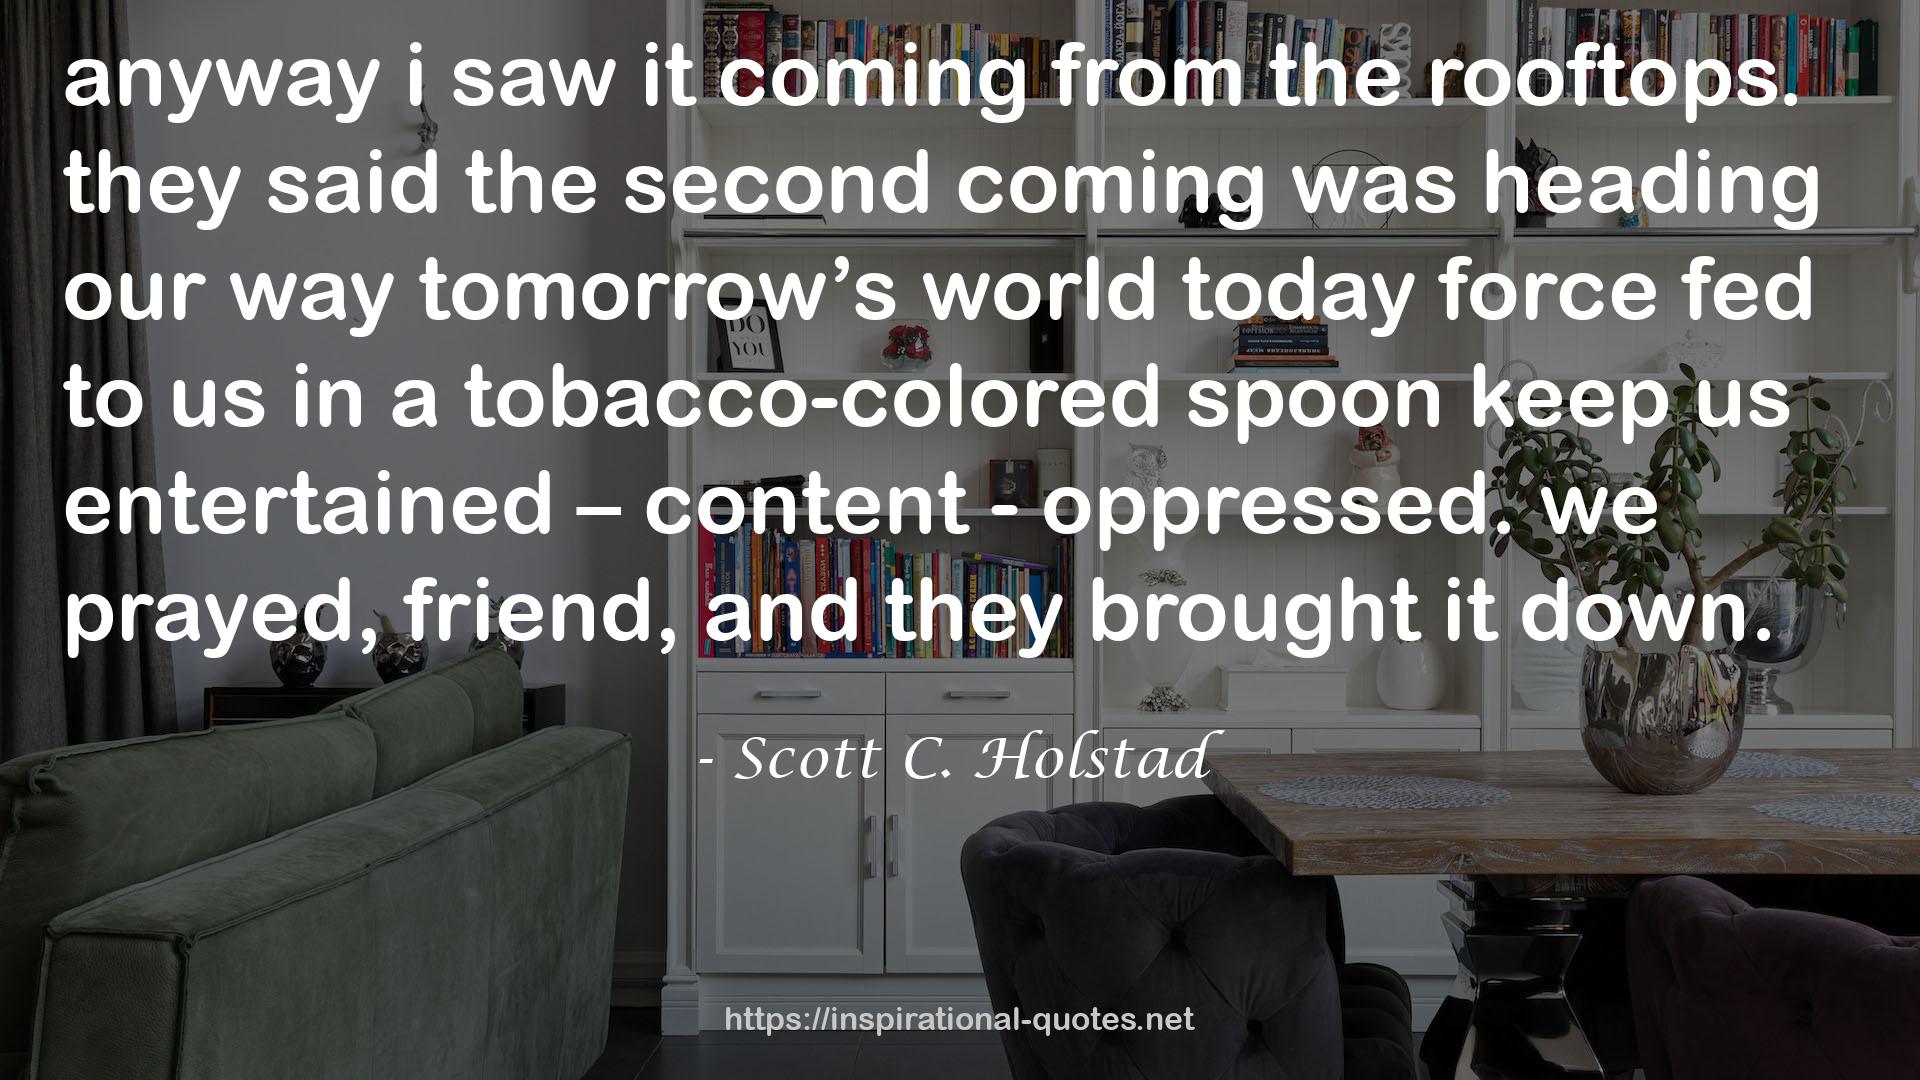 Scott C. Holstad quote : anyway i saw it coming from the rooftops. they said the second coming was heading our way tomorrow’s world today force fed to us in a tobacco-colored spoon keep us entertained – content - oppressed. we prayed, friend, and they brought it down.